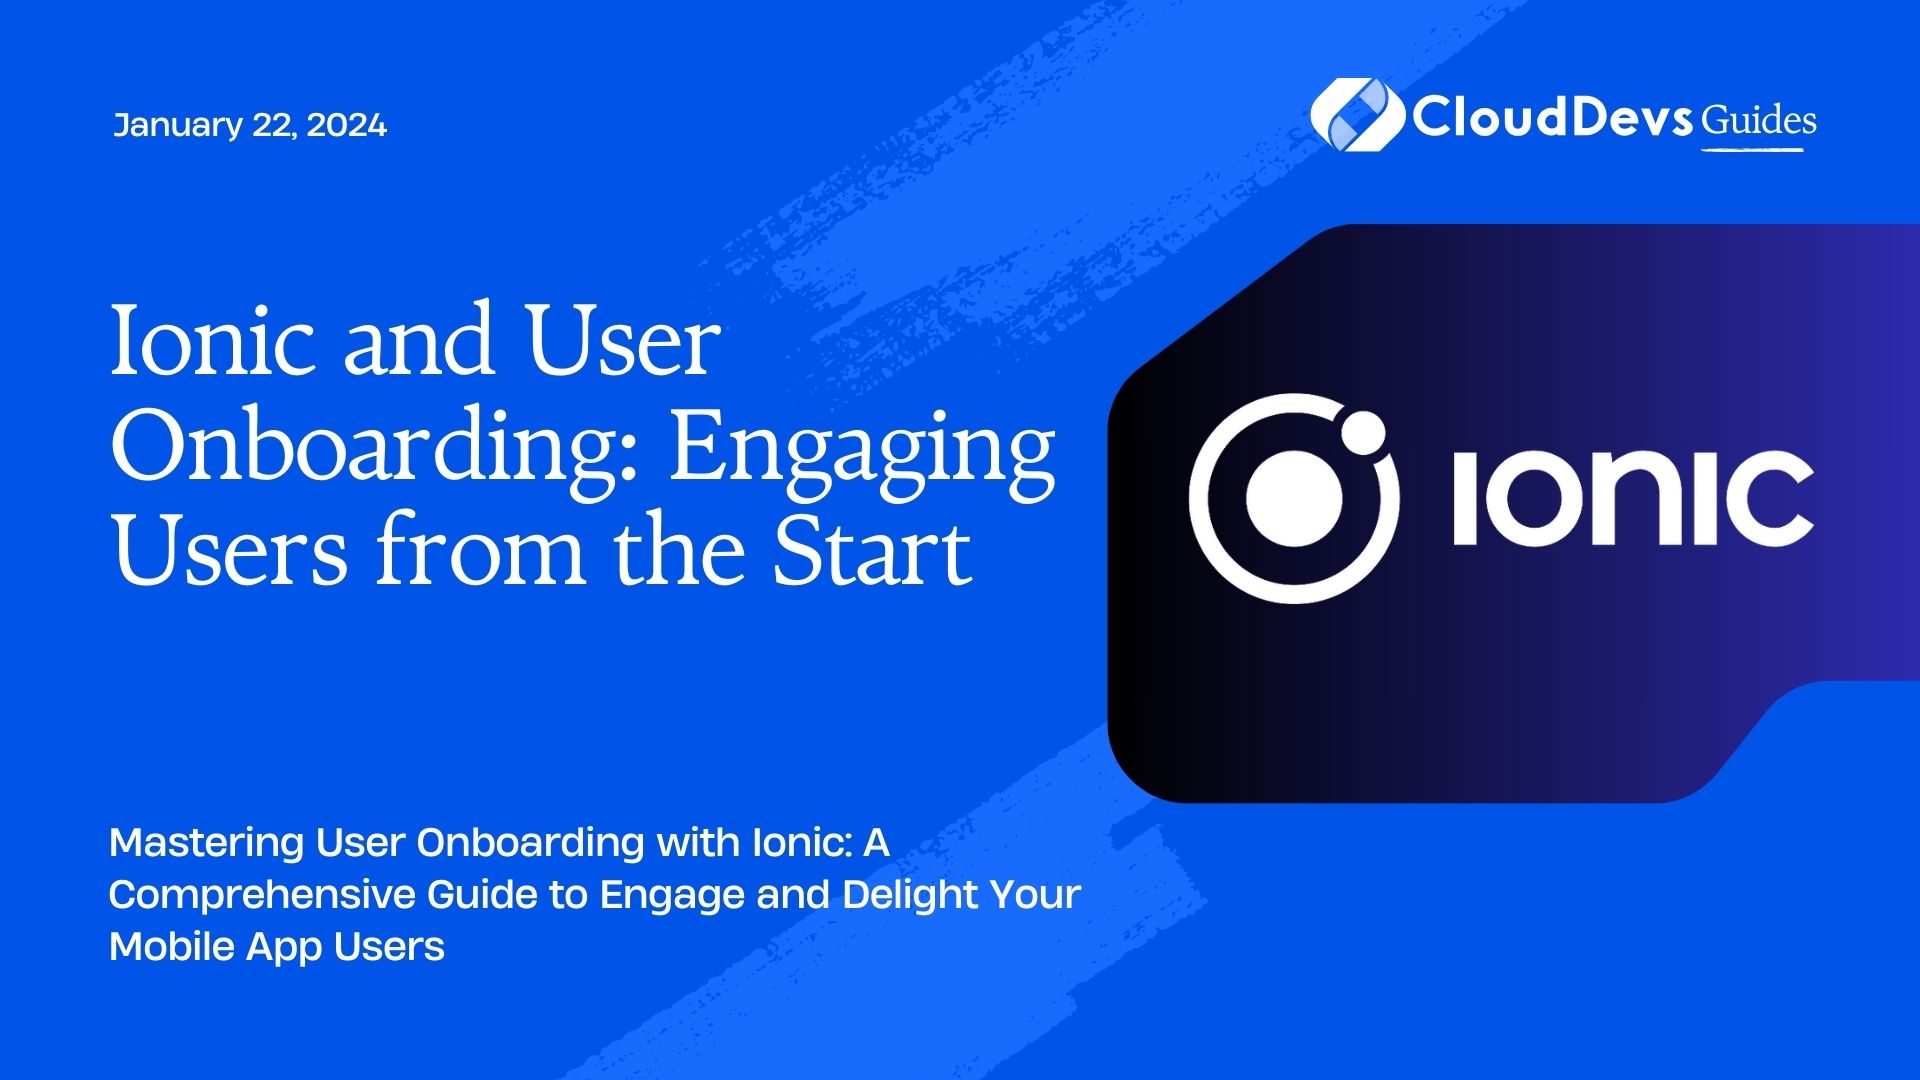 Ionic and User Onboarding: Engaging Users from the Start